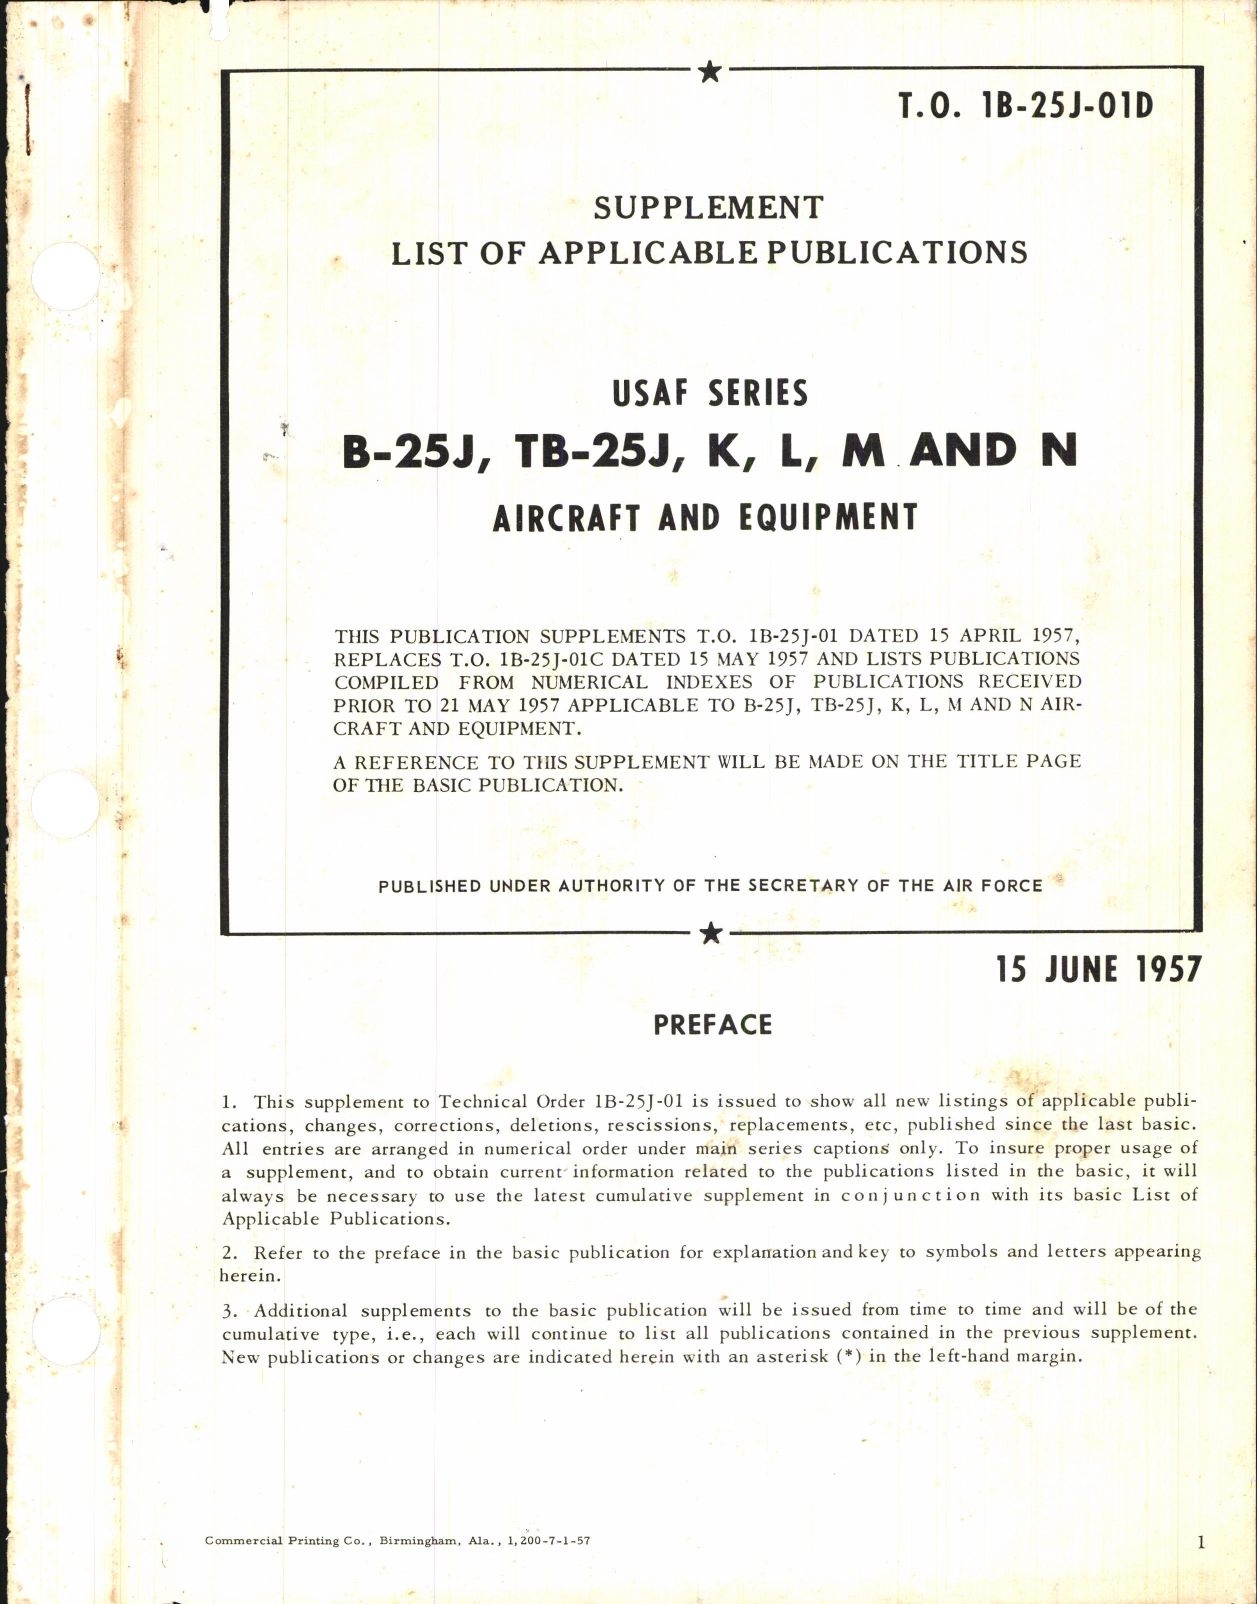 Sample page 1 from AirCorps Library document: Supplement List of Applicable Publications for B-25J, TB-25J, K, L, M, and N Aircraft & Equipment